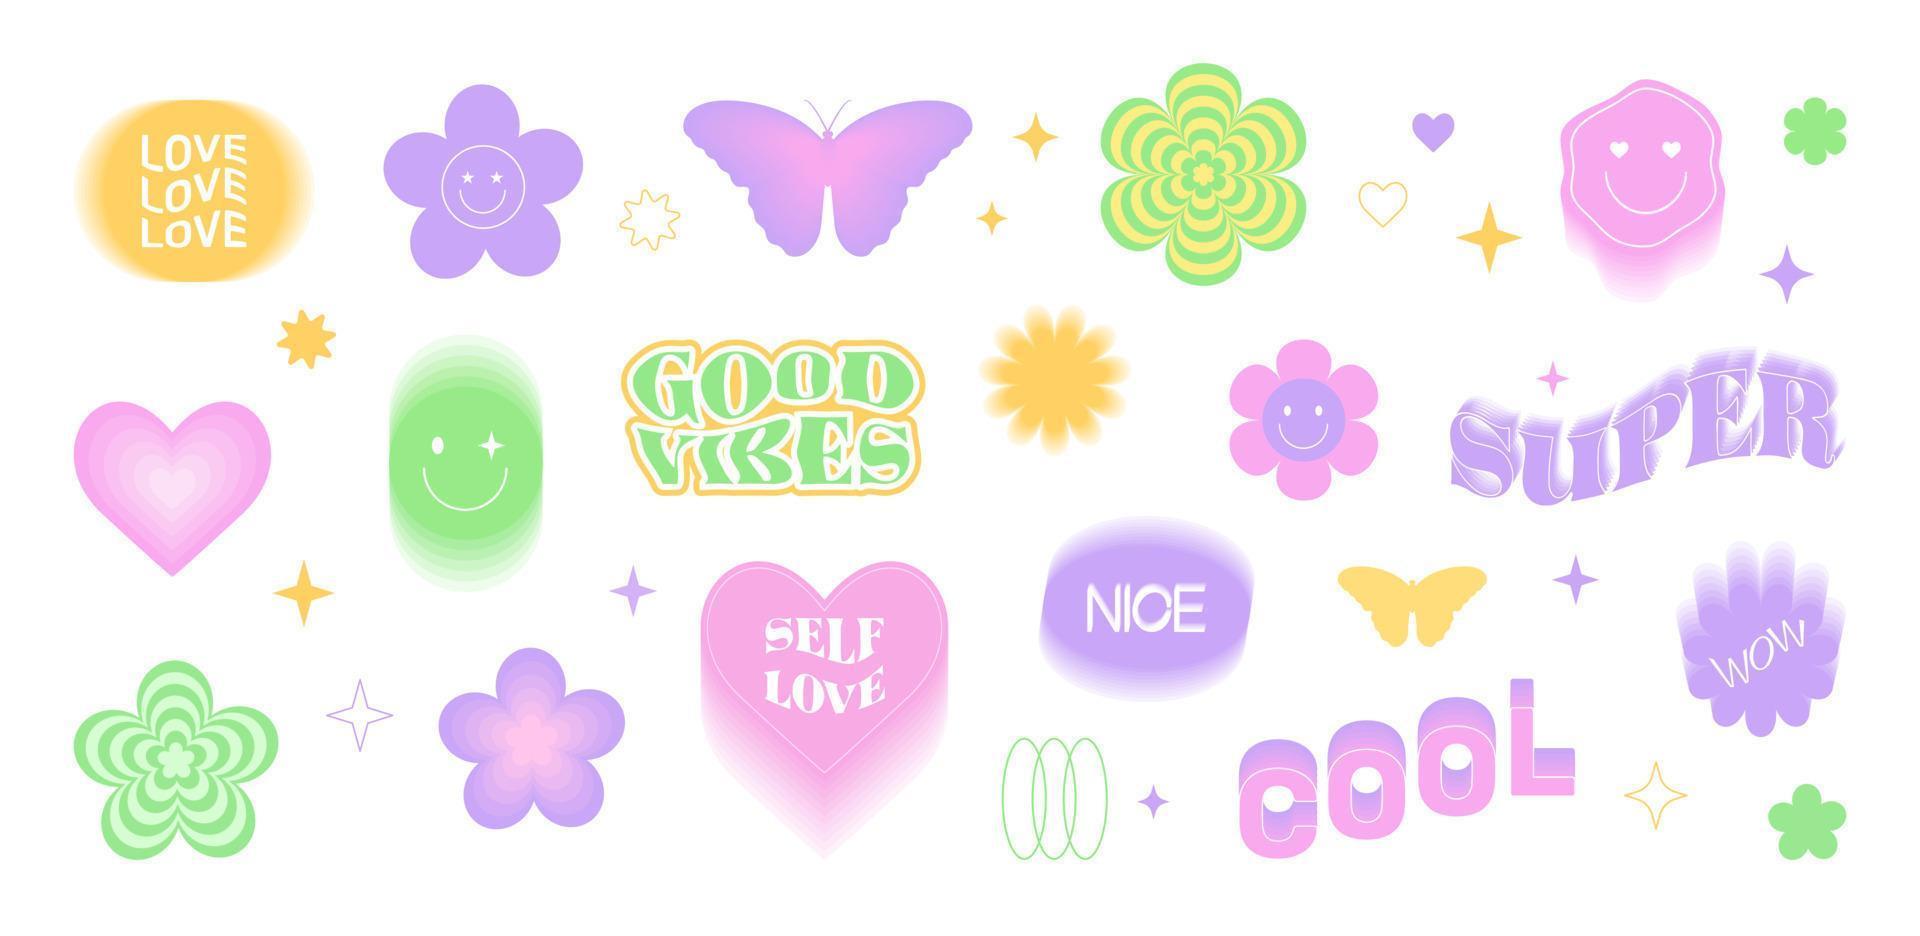 Y2k sticker set. Butterfly, heart, daisy, flower in the trendy psychedelic style of the 90s, 2000s. Pink, yellow, green colors. Cute vector illustrations, elements and signs.